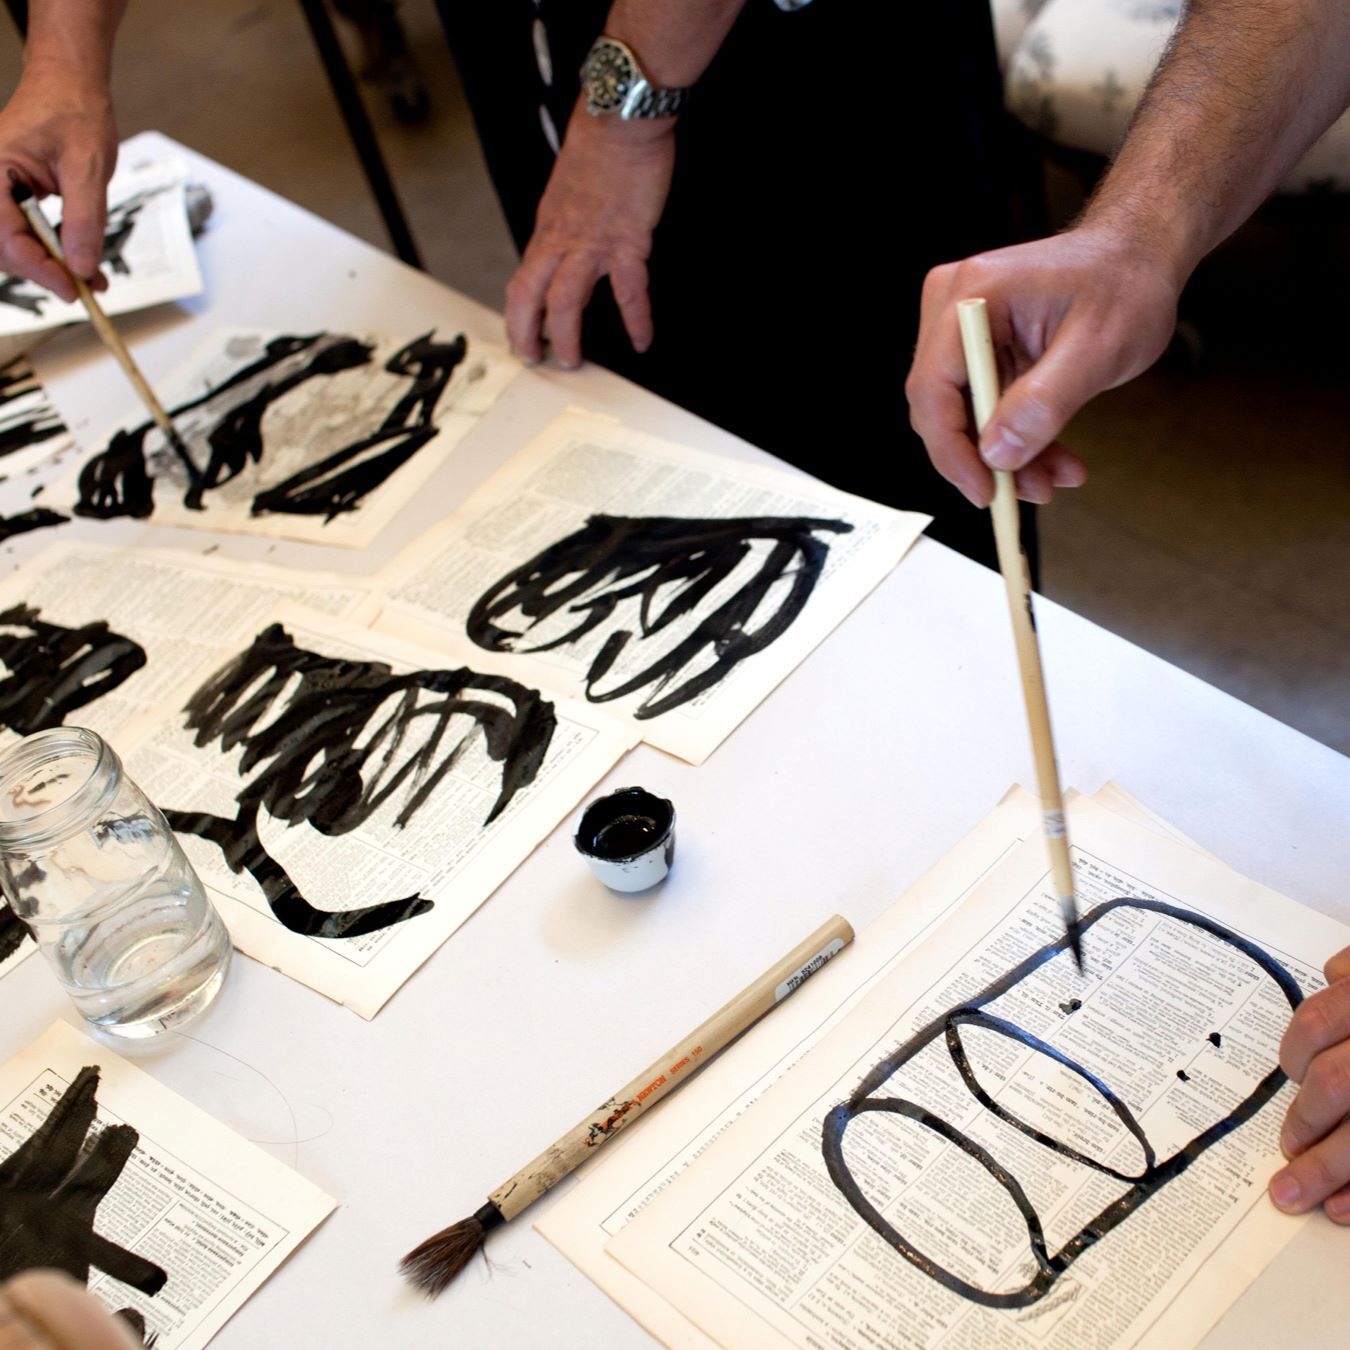 artists hands are holding paintbrushes and painting on printed paper with lettering